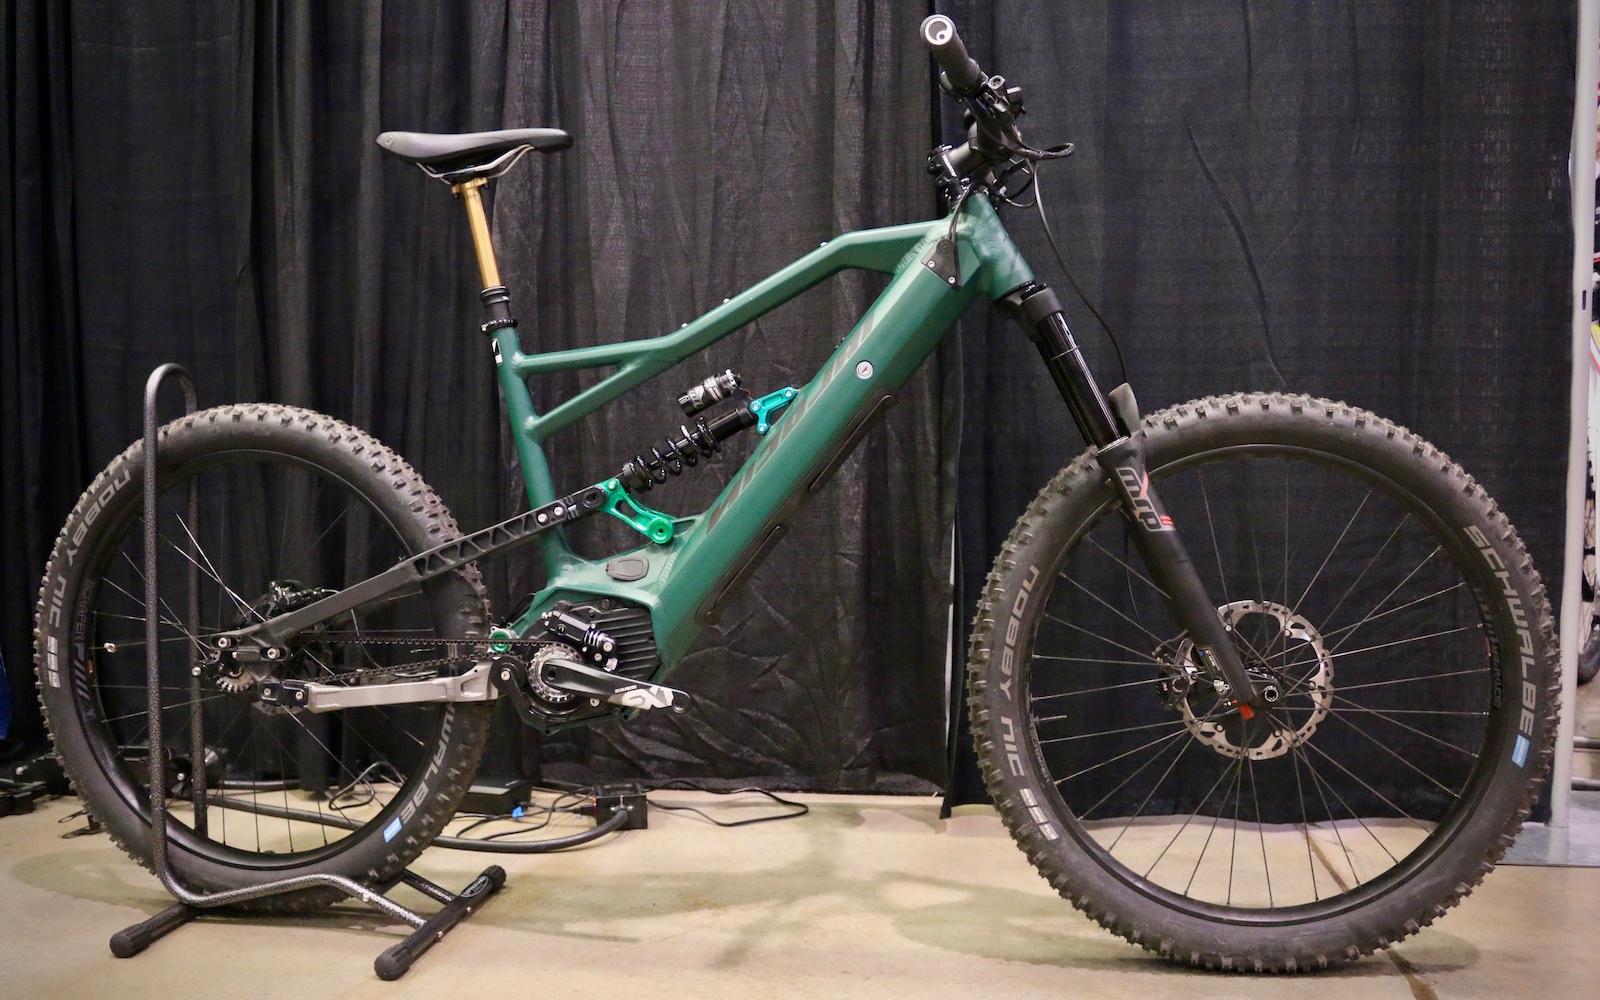 Are you a lazy mountain biker? There's a crazy expensive ebike mod for that